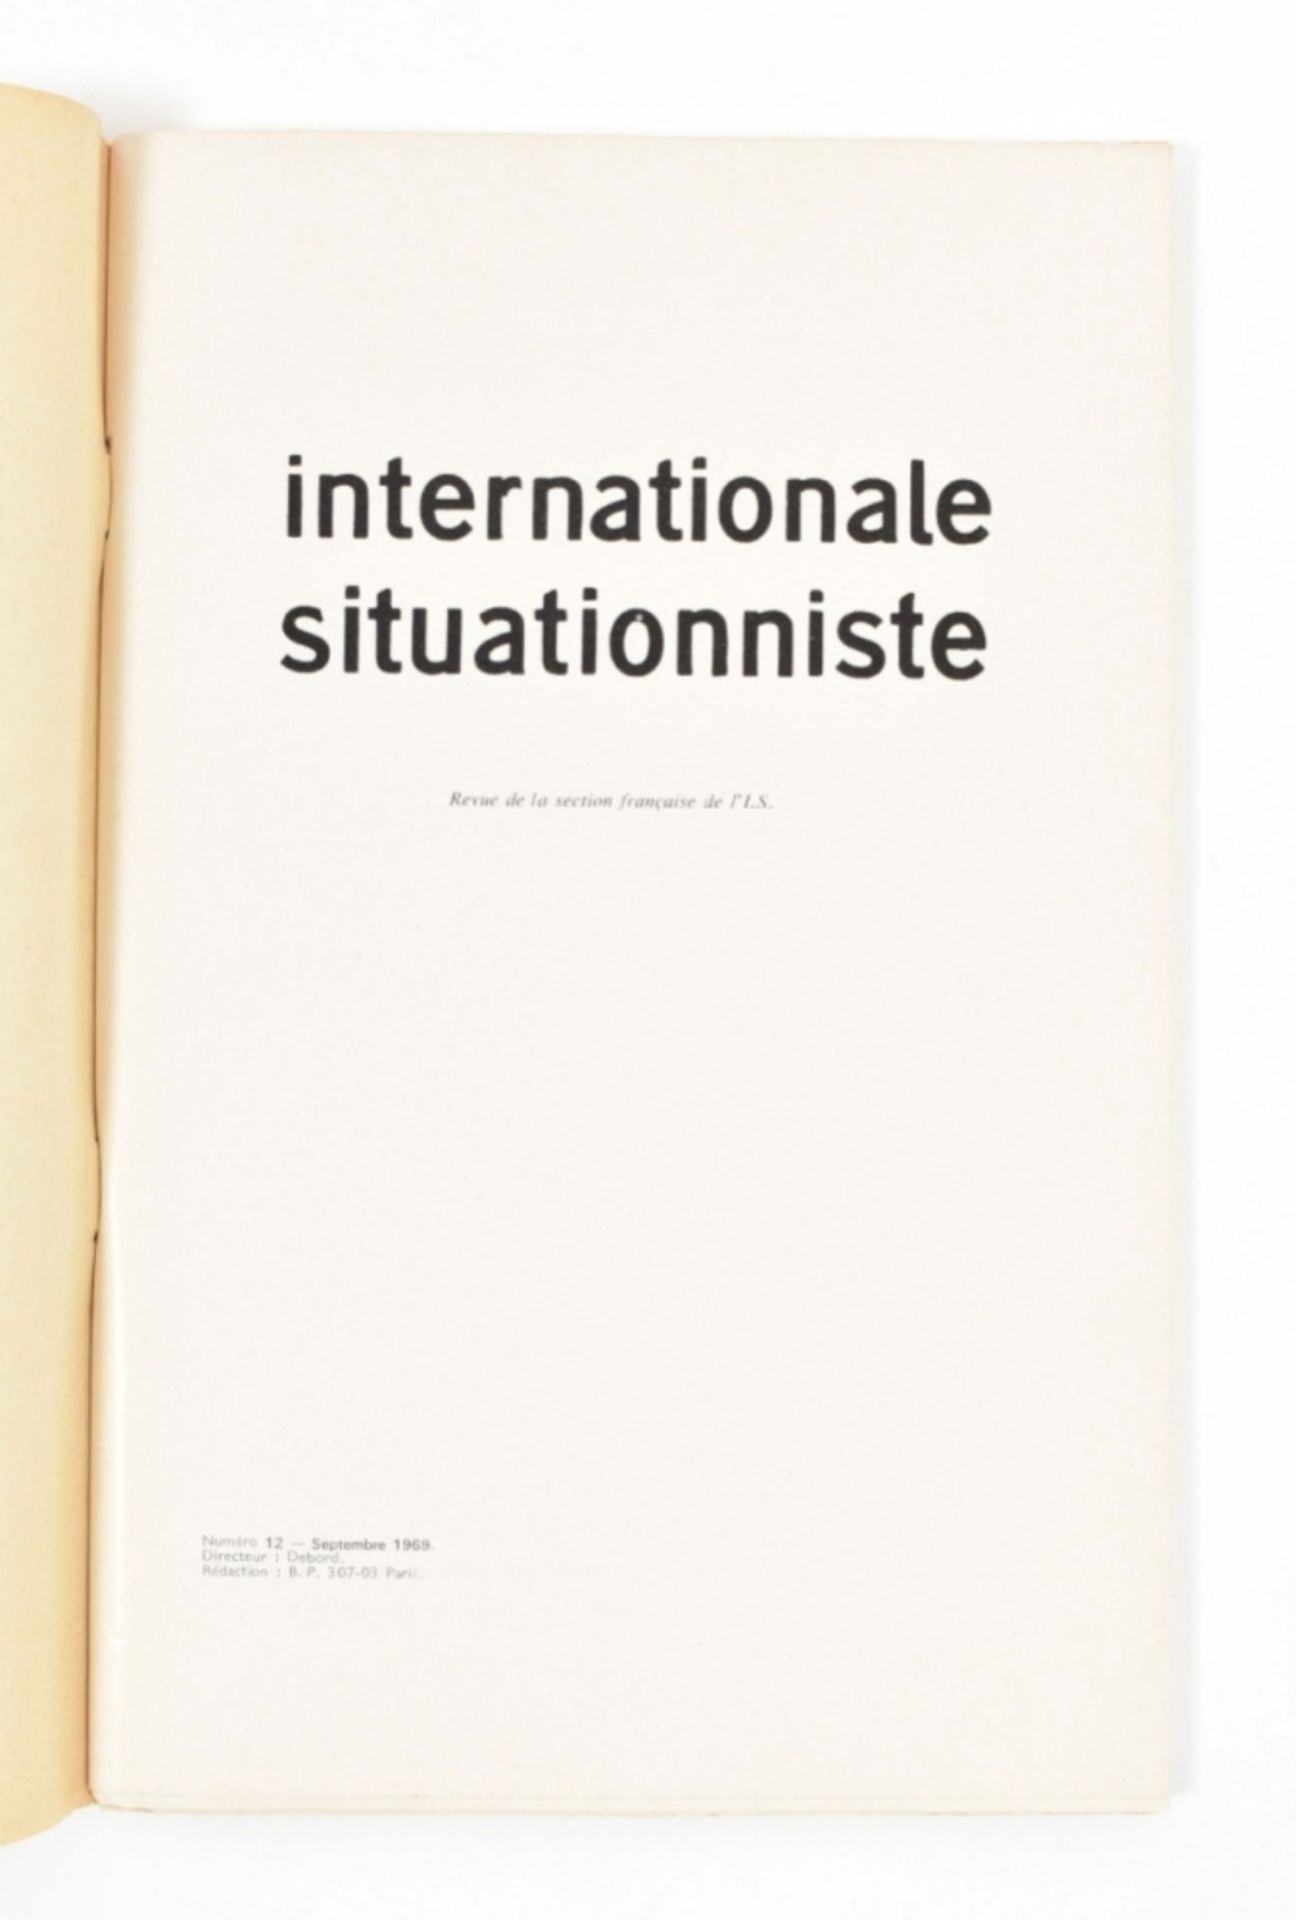 [Situationists] Plankton, Internationale Situationniste No.12 in disguise - Image 3 of 4